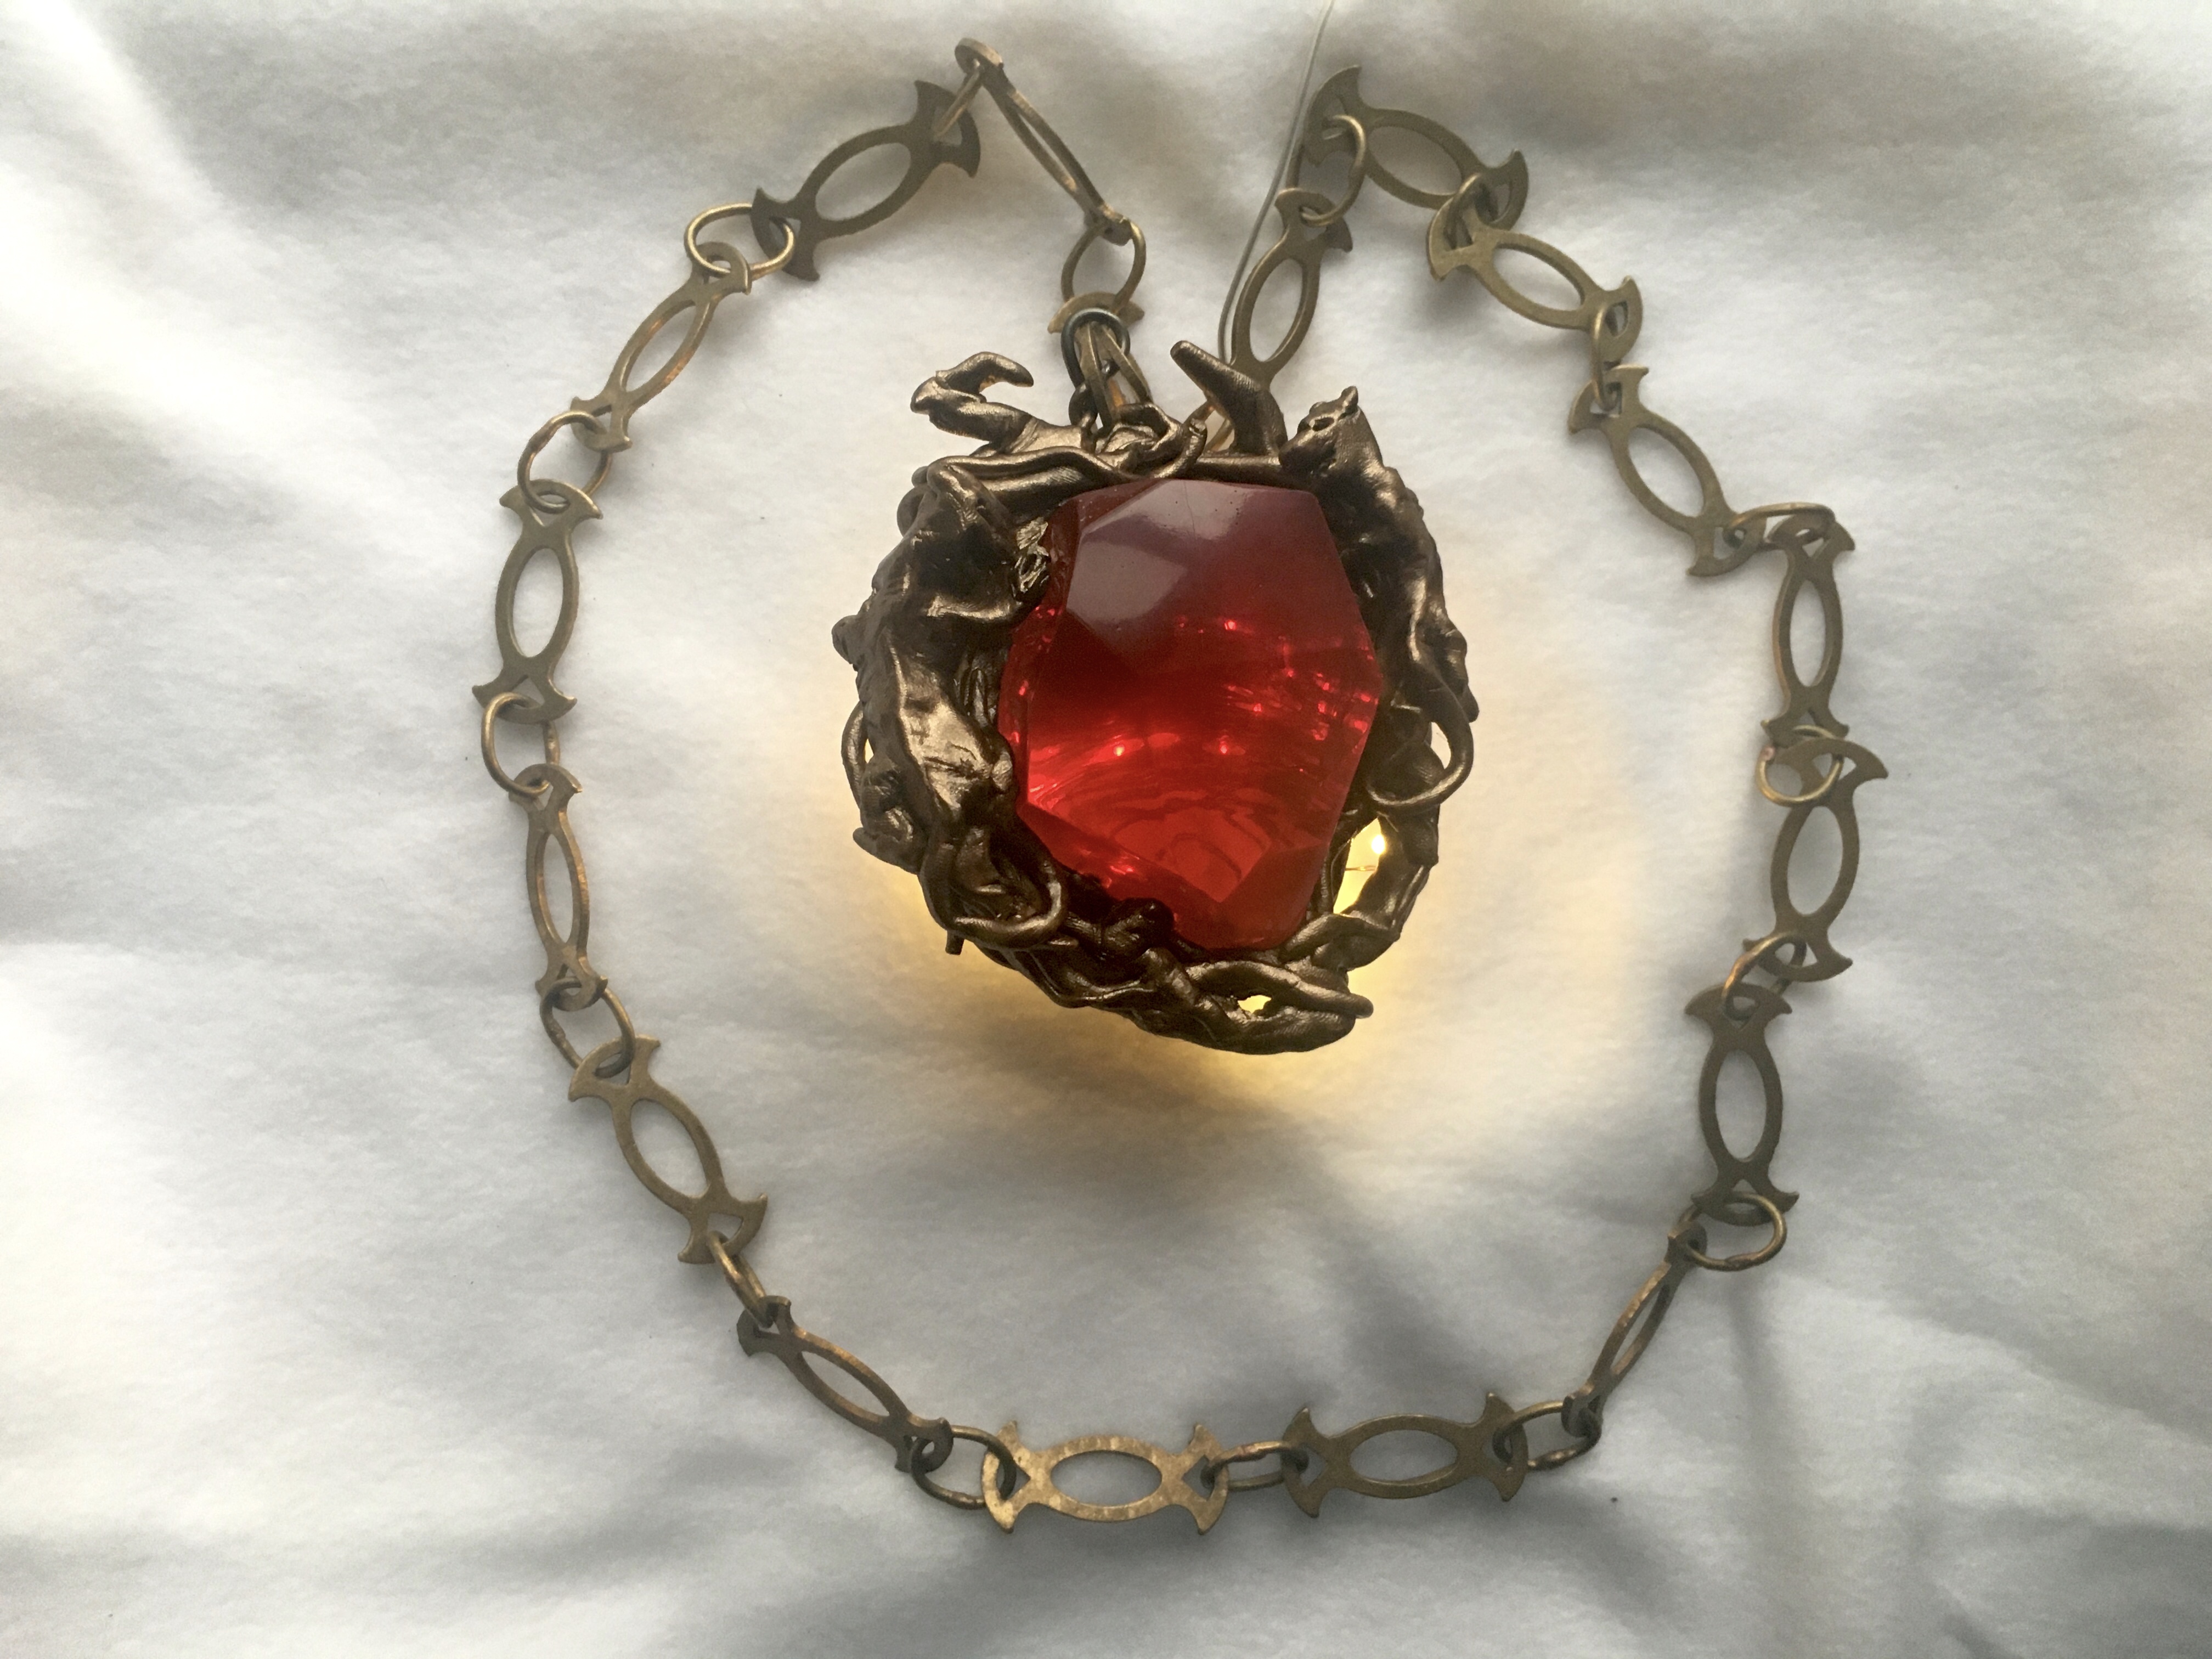 Werewolf by Night's Bloodstone necklace, Page 2